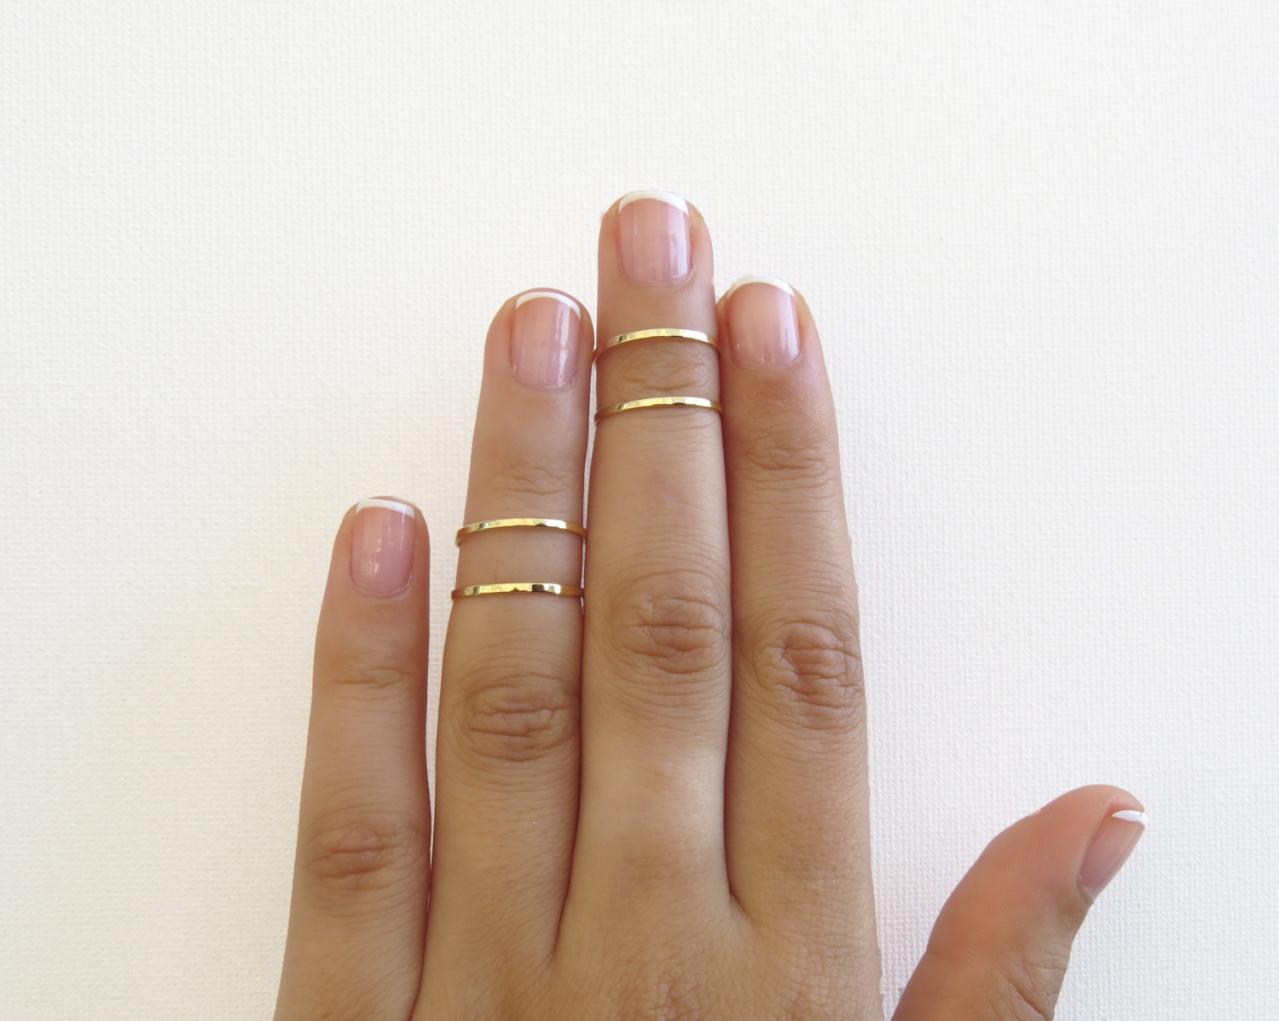 Gold Ring - Stacking rings, Knuckle Ring, Thin gold shiny bands, Set of 4 stack midi rings, Gold jewelry, Wire ring, Gold accessories